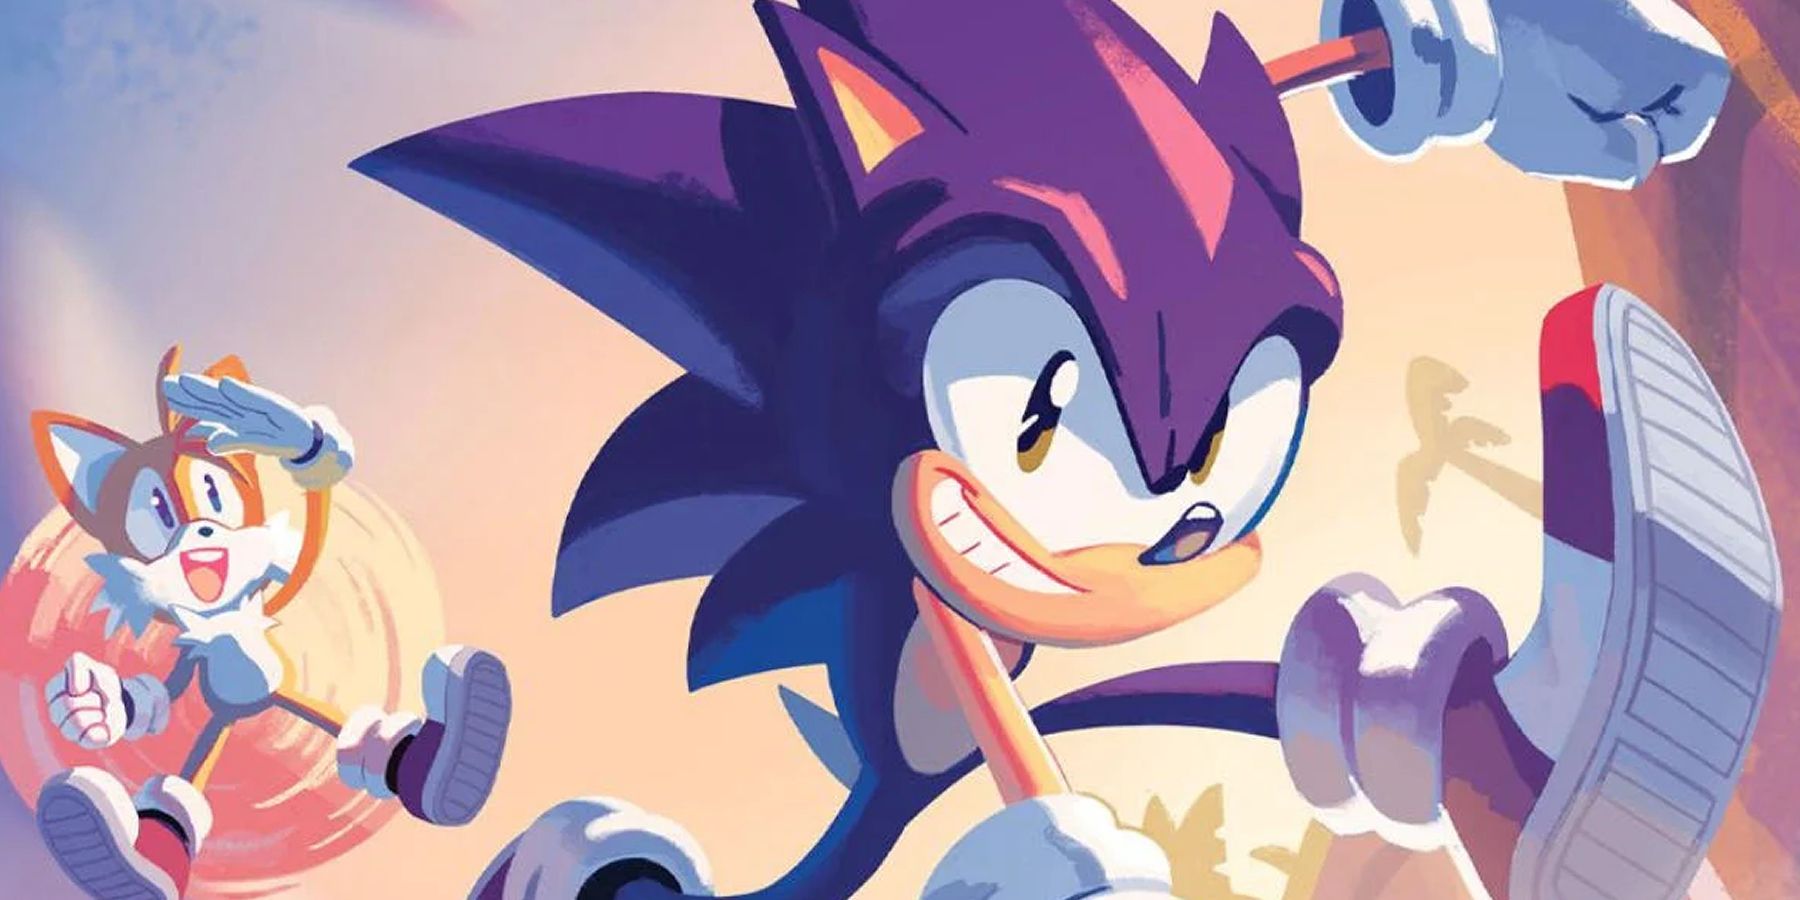 Sonic Frontiers: Convergence - Full comic - Tails' Channel